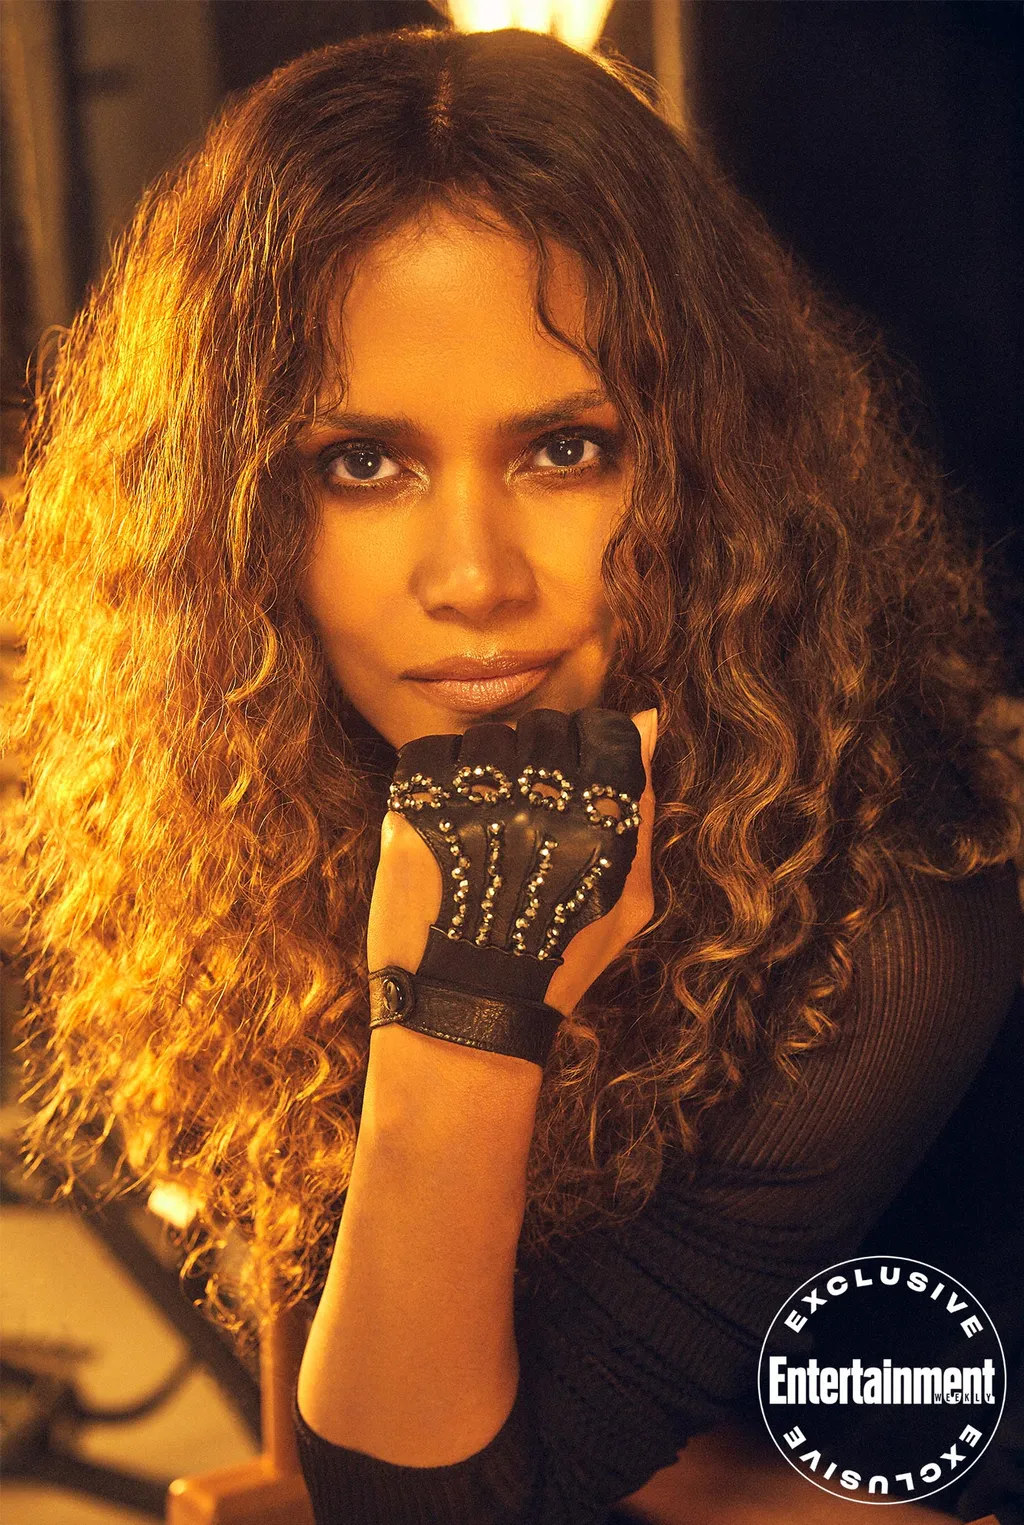 Halle Berry
Photographed exclusively for EW on July 11, 2021 in Boston, MA. 